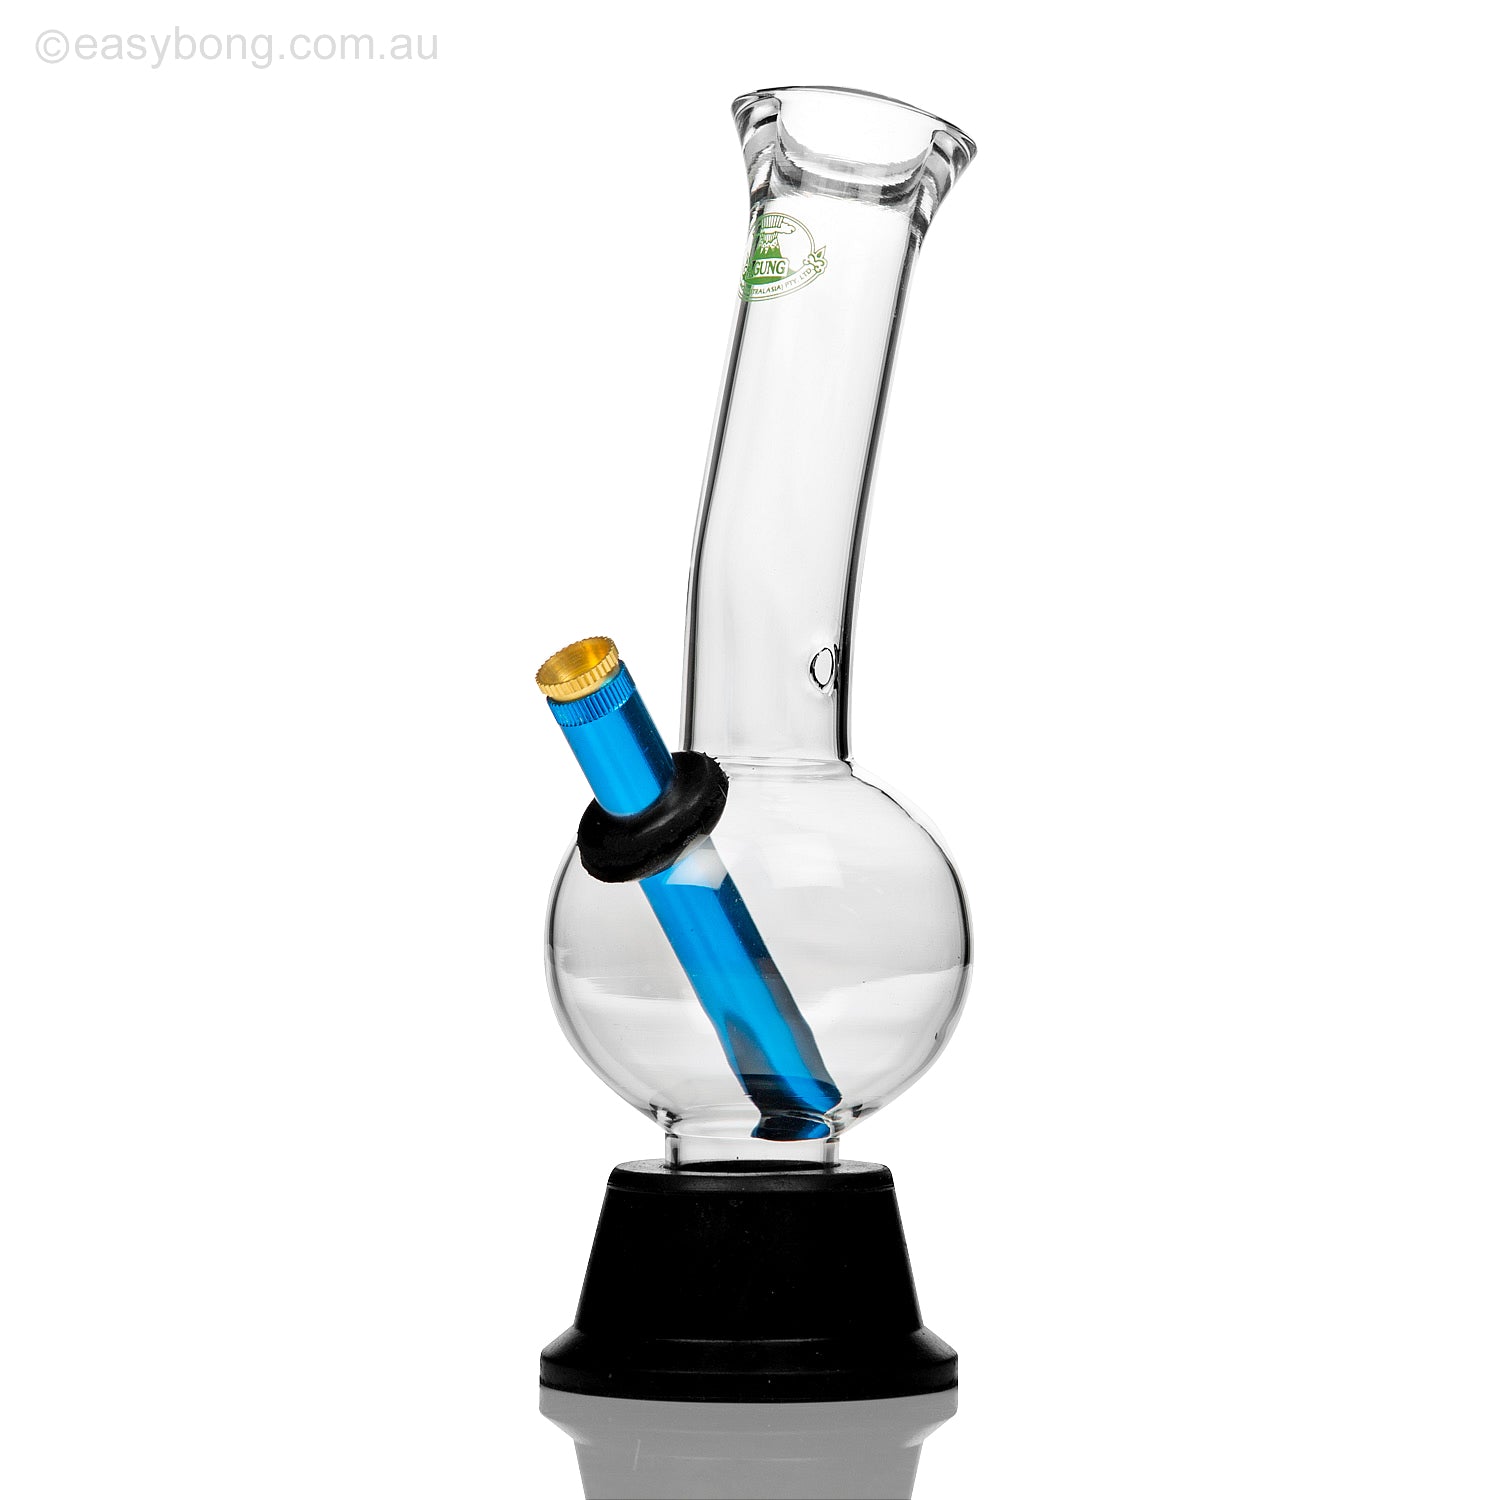 Clear glass Agung Cheech bong with cone piece and stem from easybong.